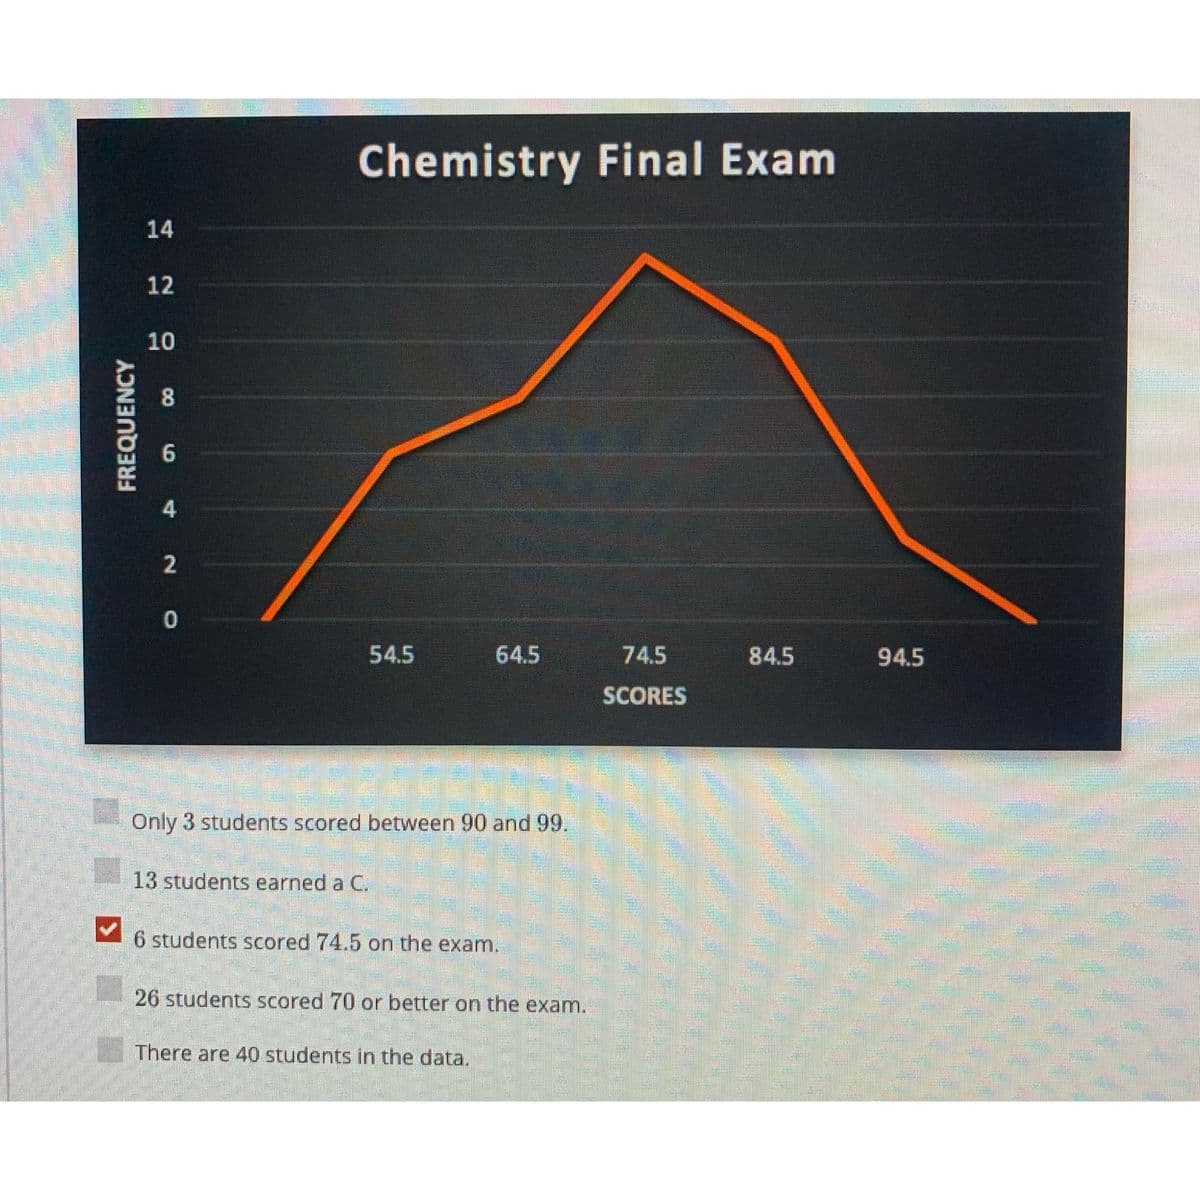 Chemistry Final Exam
14
12
10
8.
2
54.5
64.5
74.5
84.5
94.5
SCORES
Only 3 students scored between 90 and 99.
13 students earned a C.
6 students scored 74.5 on the exam.
26 students scored 70 or better on the exam.
There are 40 students in the data.
FREQUENCY
